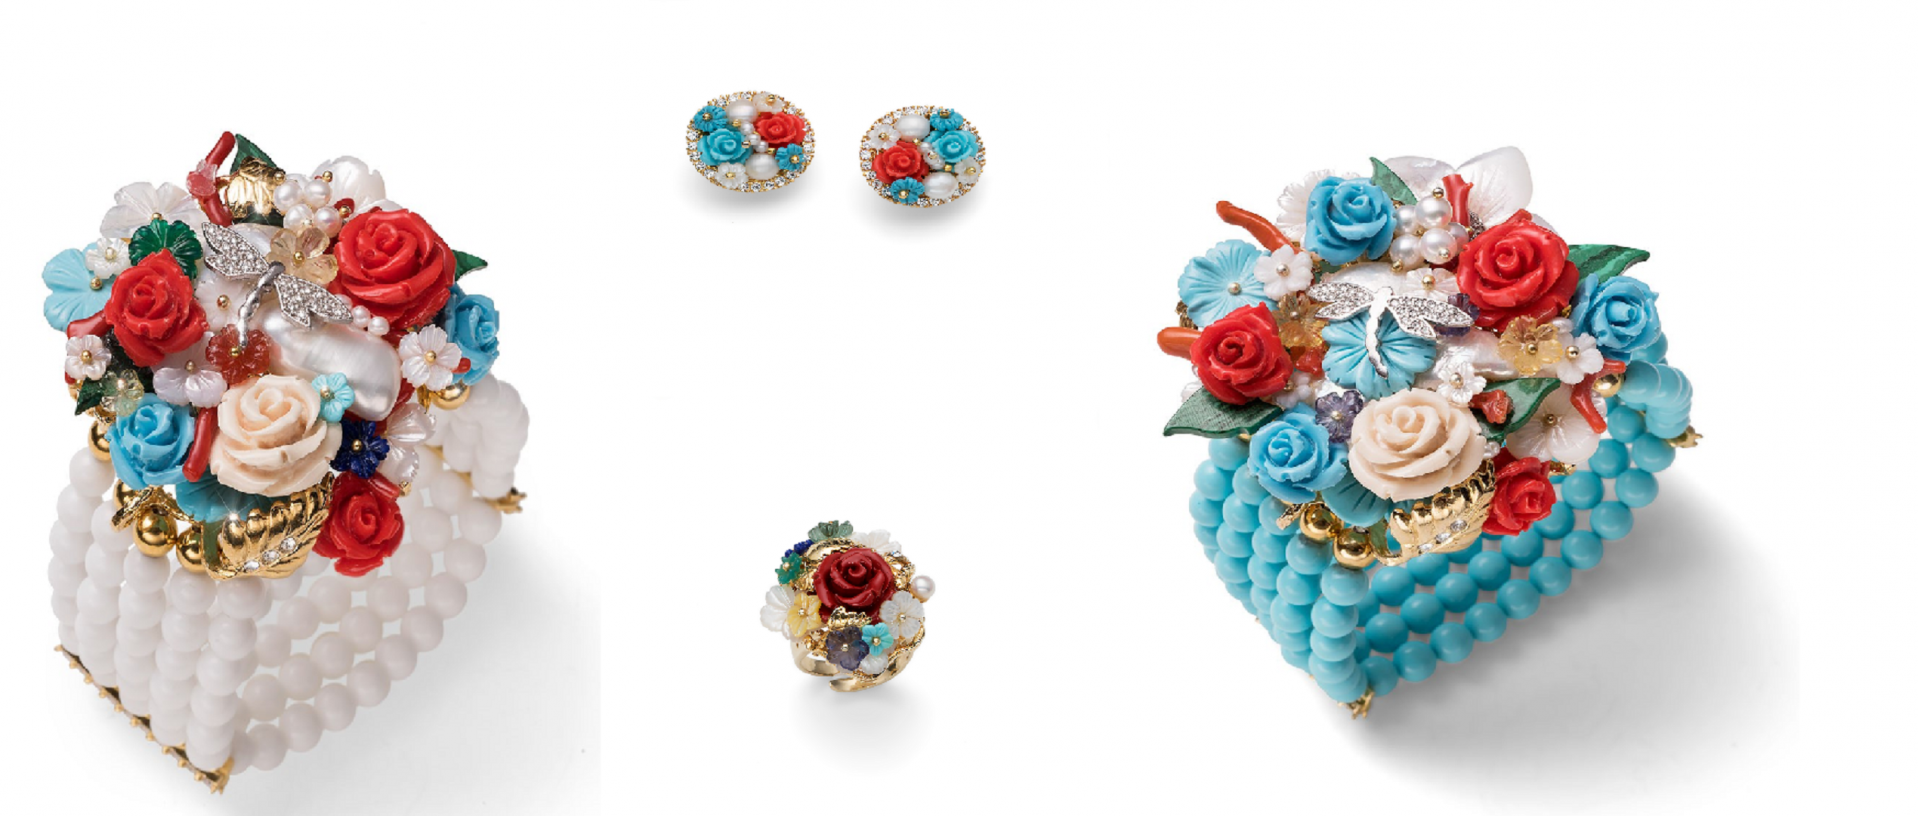 bracelets, ring and earrings with white and blue pearls and flower shaped details